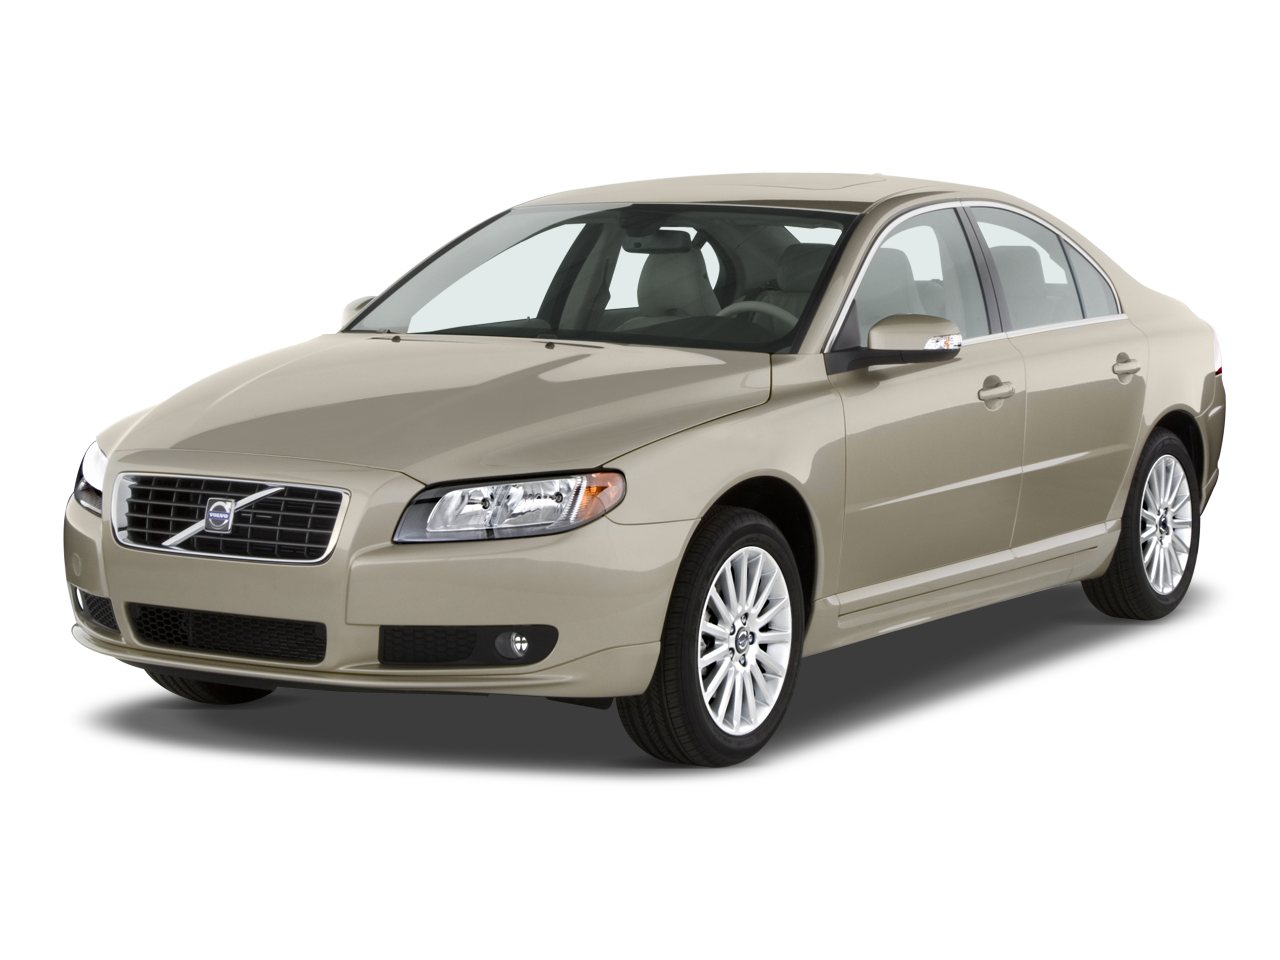 2010 Volvo S80 Prices, Reviews, and Photos - MotorTrend